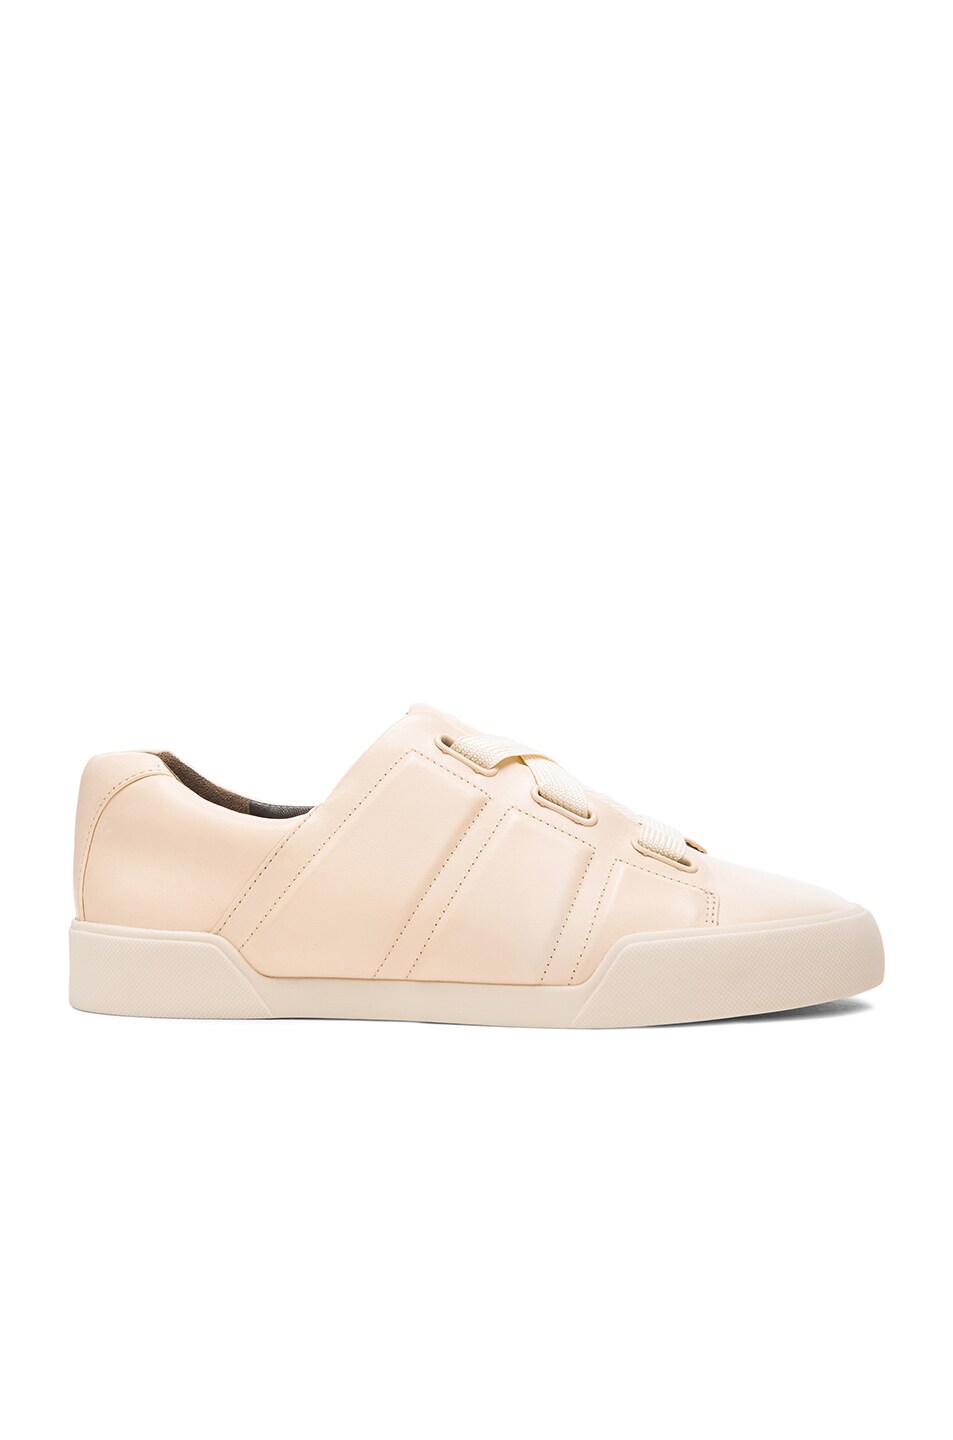 Image 1 of 3.1 phillip lim Morgan Low Top Leather Sneakers in Porcelain